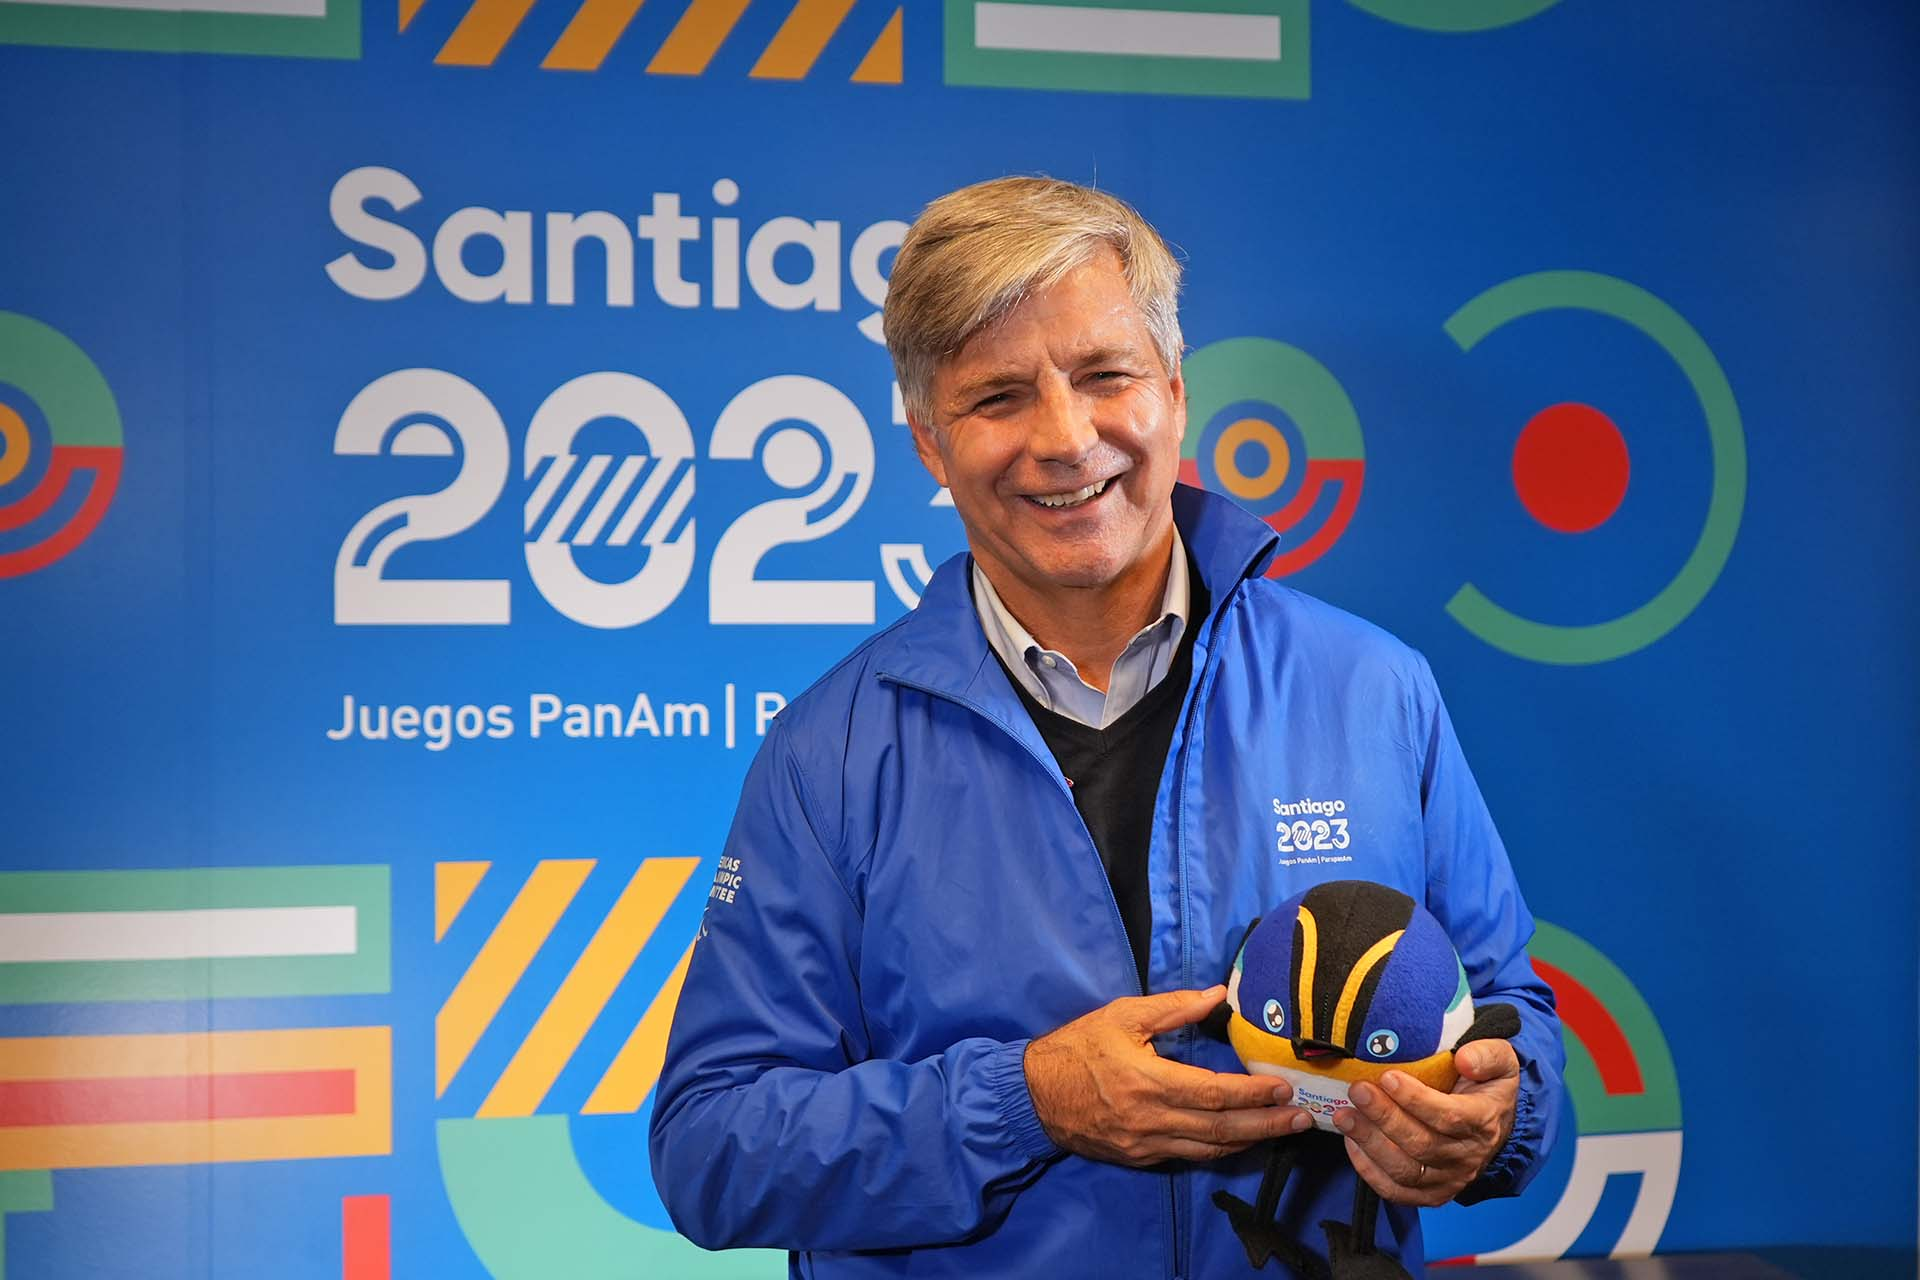 Santiago 2023 executive director Harold Mayne-Nicholls is optimistic that Chile's capital is capable of hosting the Olympics ©Santiago 2023